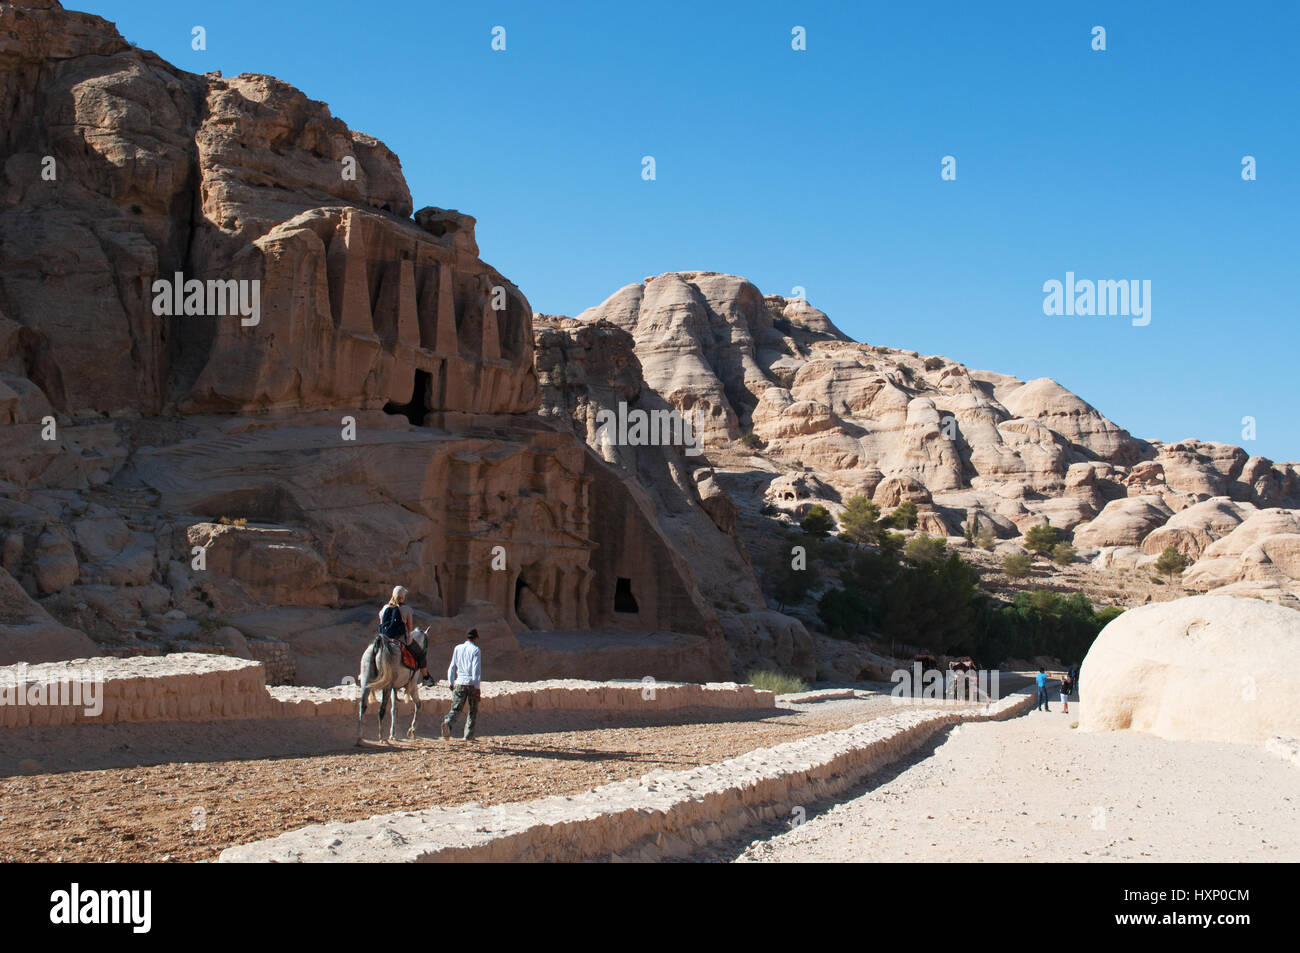 Jordan: a tourist on a donkey in front of the Obelisk Tomb and Bab As-Siq Triclinium on the road to the Siq, the main entrance to the city of Petra Stock Photo